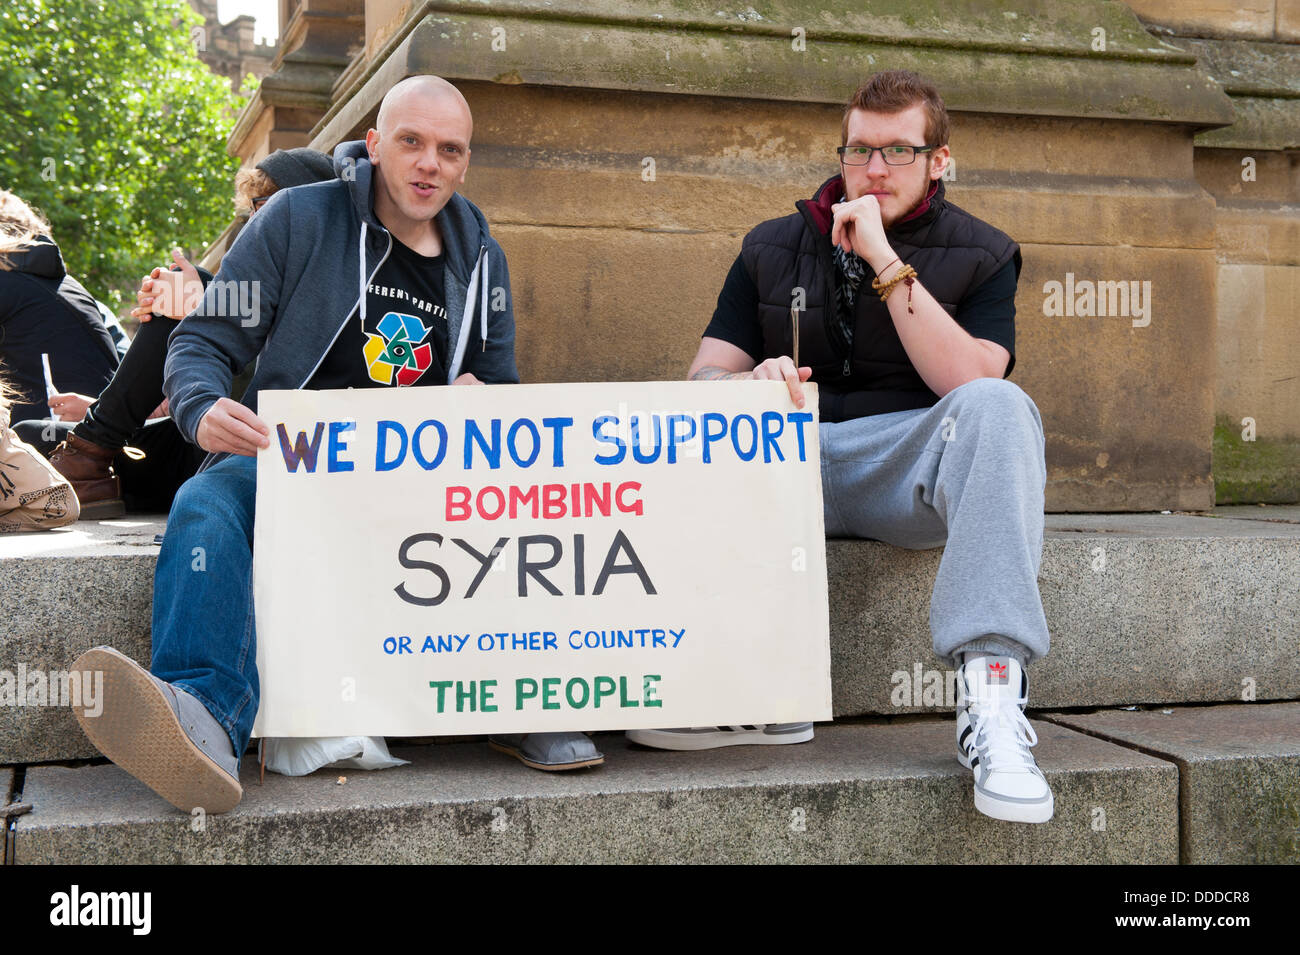 people protesting against bombing syria st peter's square manchester 31 august 2013 Stock Photo